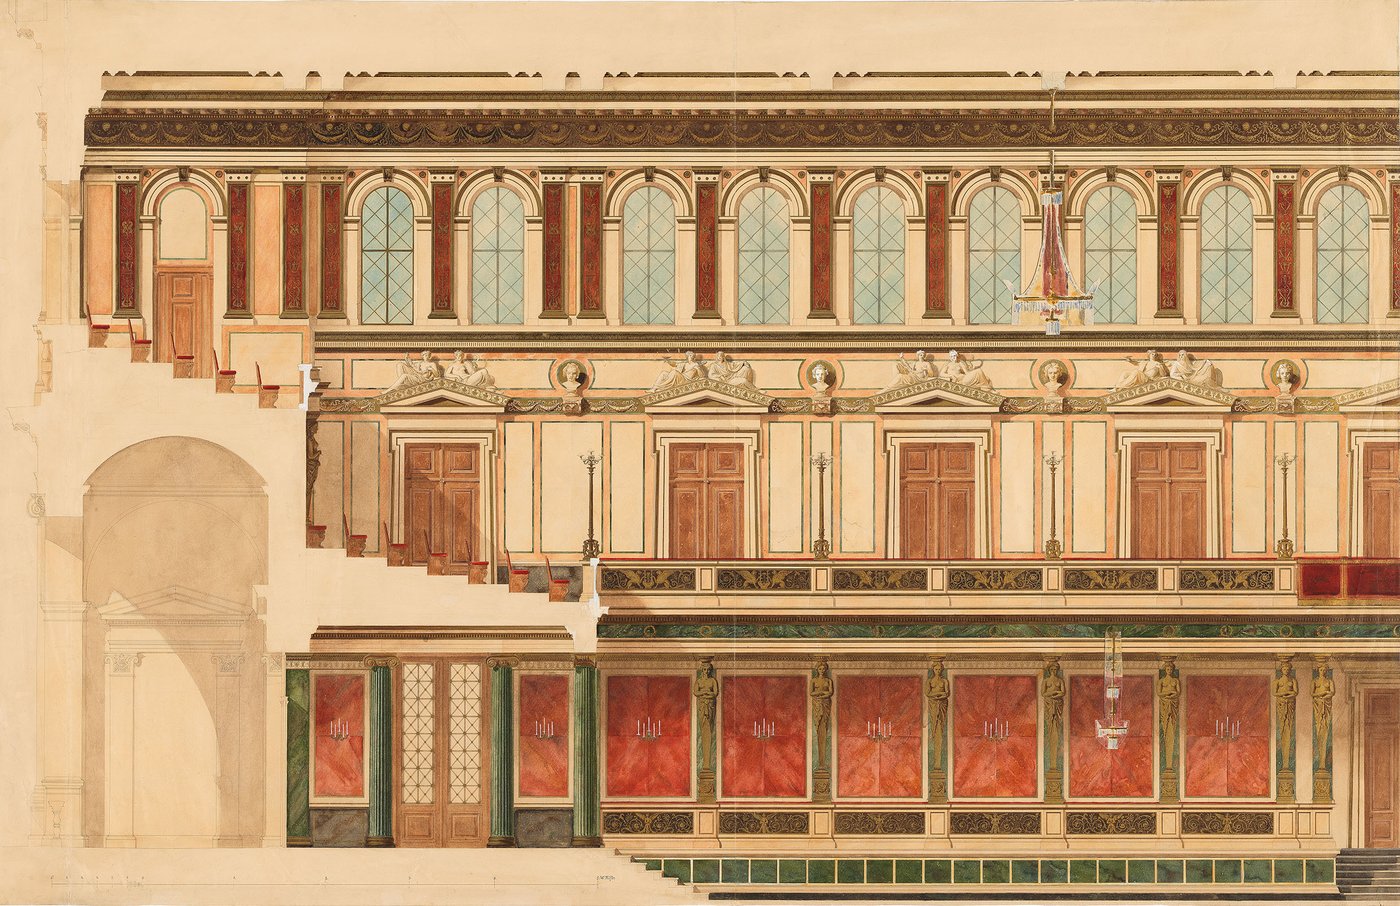 Shown is the longitudinal section of a design for the Golden Hall of the Musikverein in Vienna.